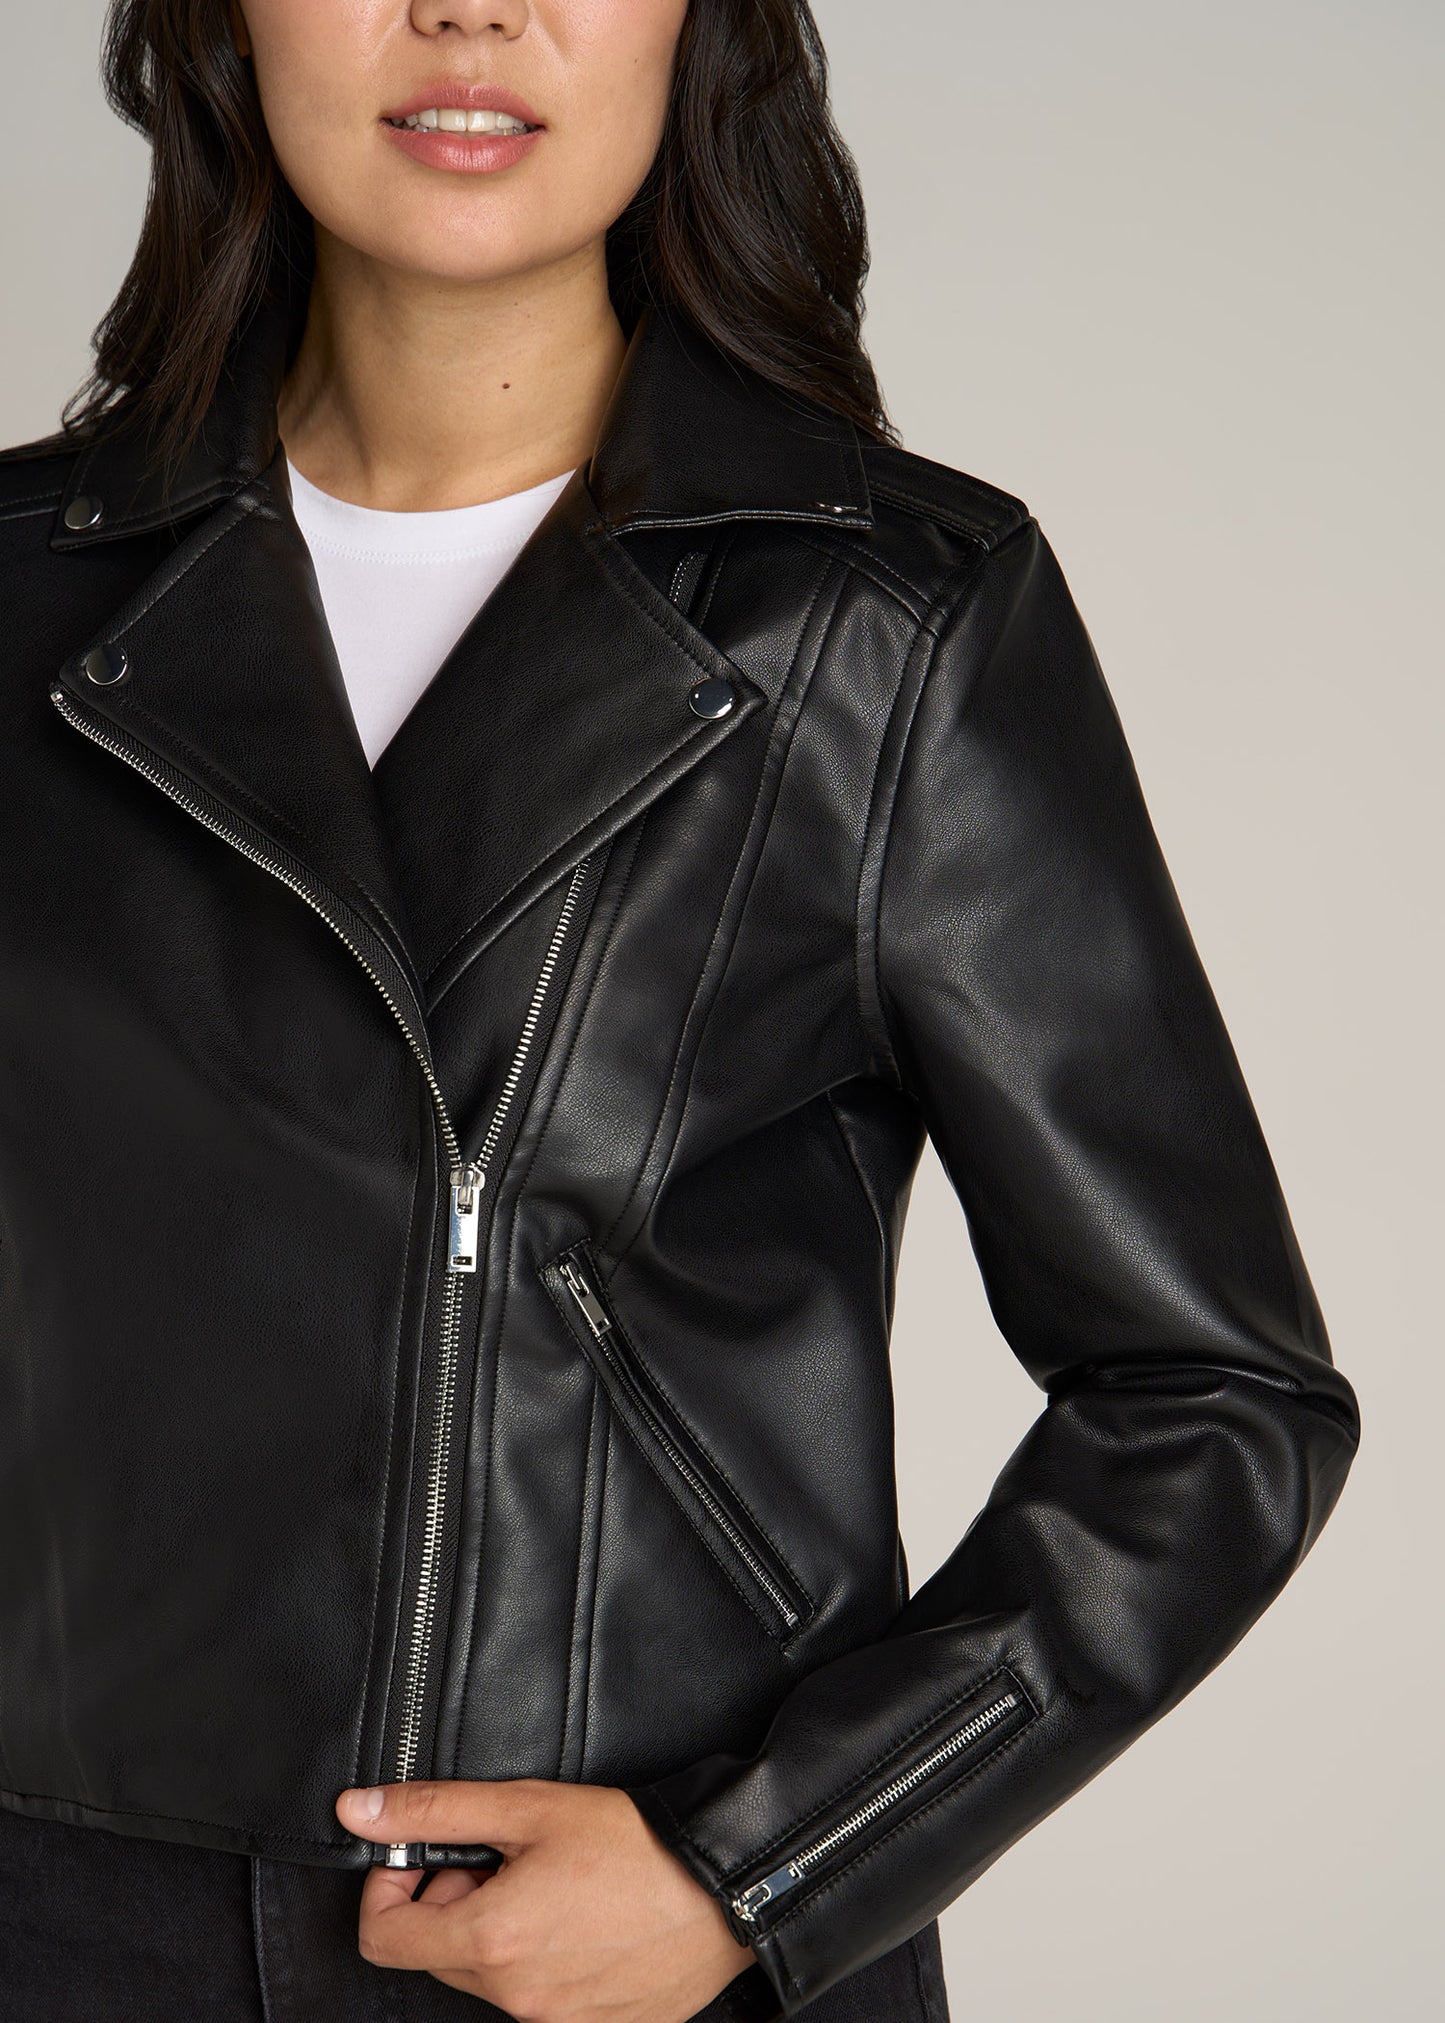 A tall woman wearing American Tall's Faux Leather Moto Jacket in the color black.